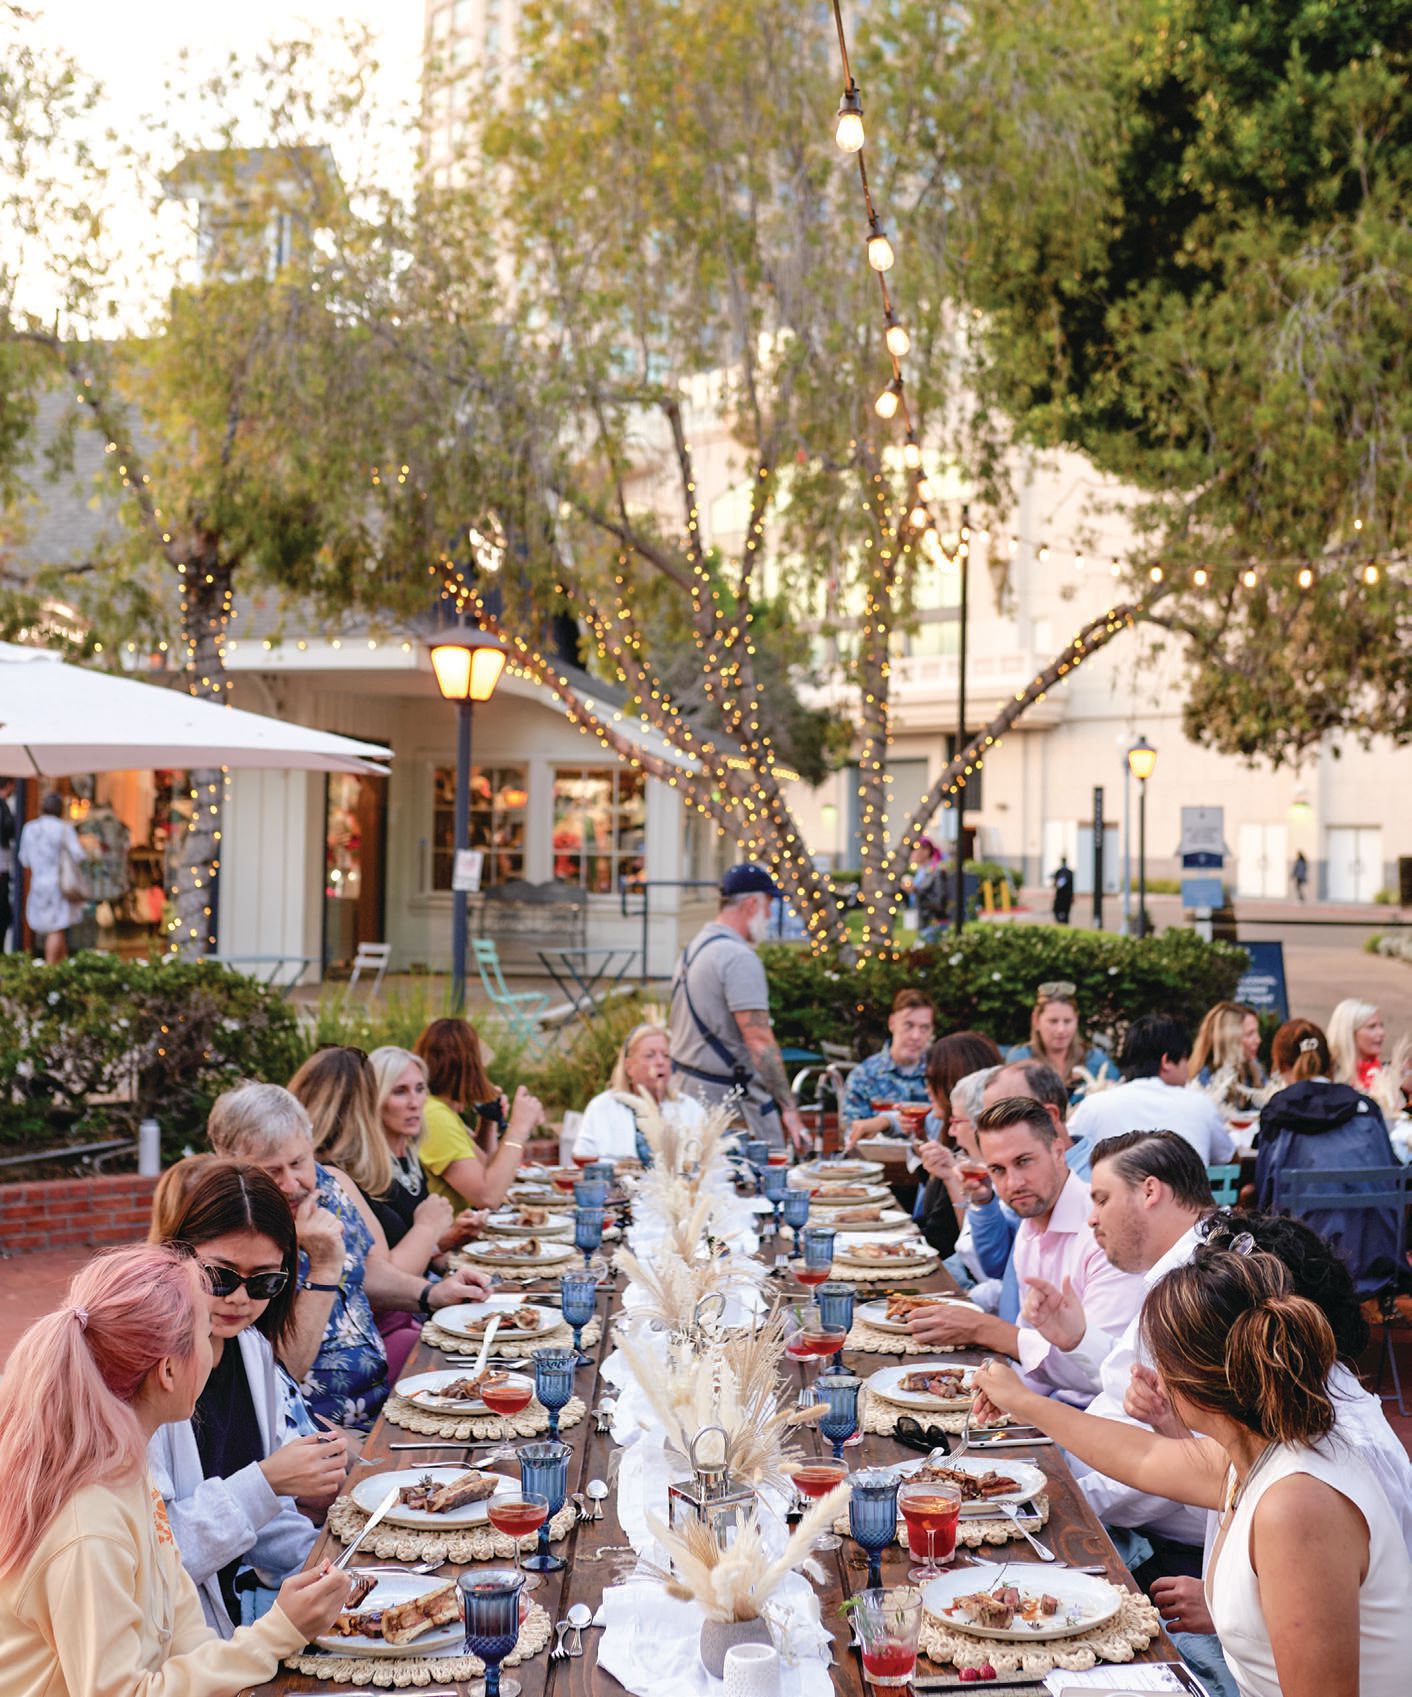 Guests at The Blank Table’s July dinner at Seaport Village enjoyed Icon Ranch Australian striploin wagyu. PHOTO BY HANNAH BERNABE